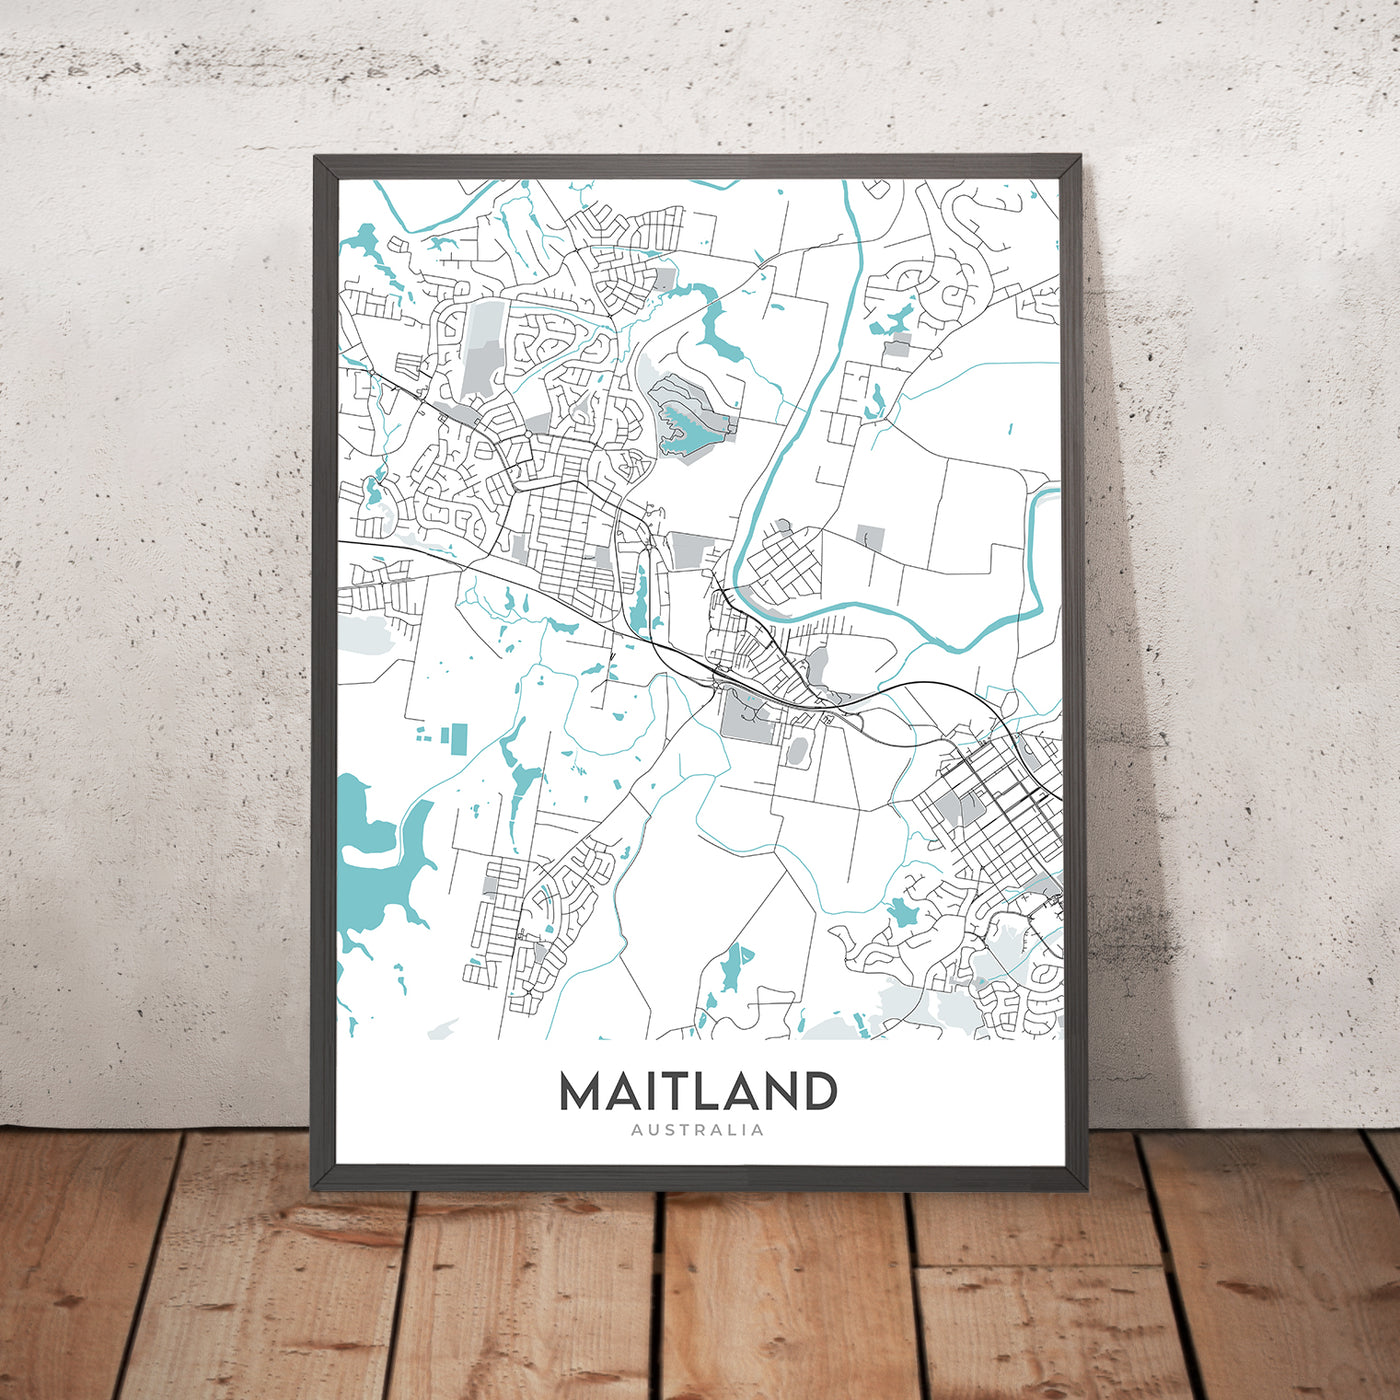 Modern City Map of Maitland, NSW: Maitland Gaol, Maitland Museum, Maitland Town Hall, New England Hwy, Pacific Hwy